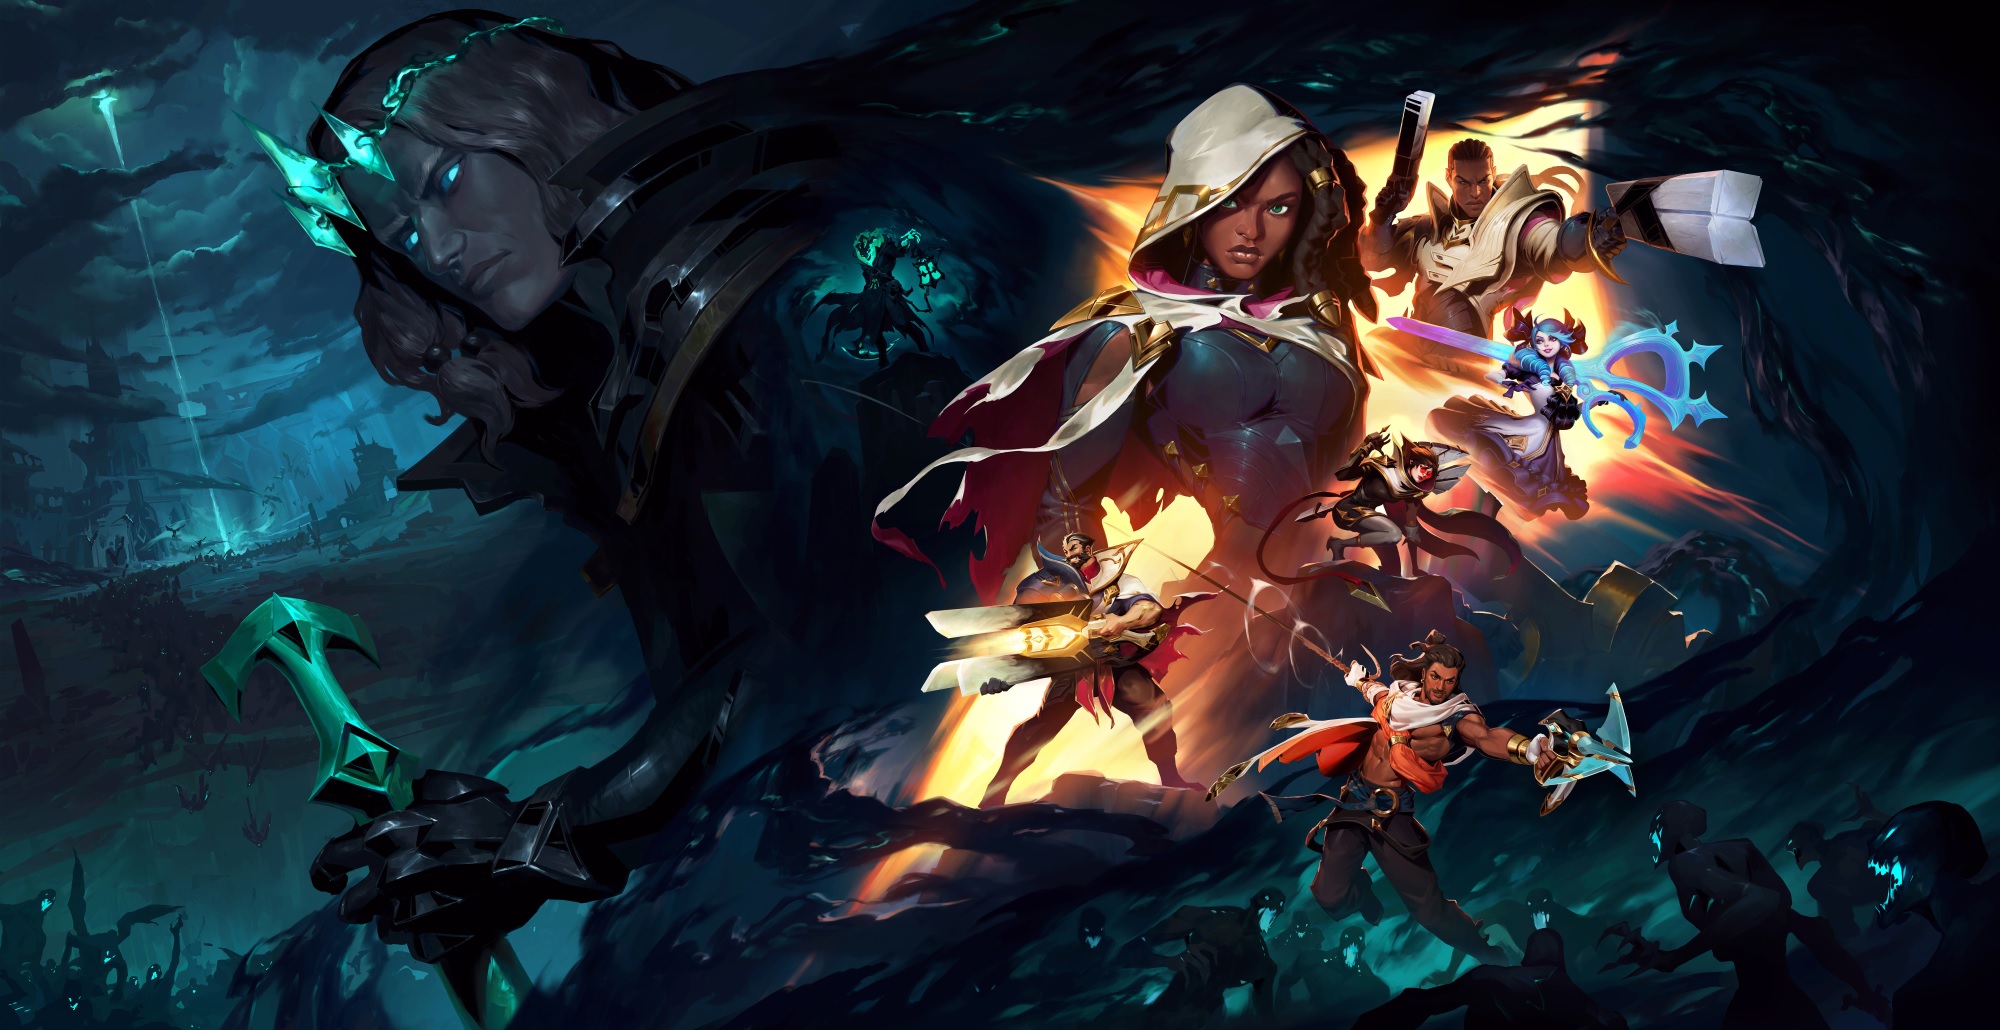 Vex Game League of Legends Wallpapers